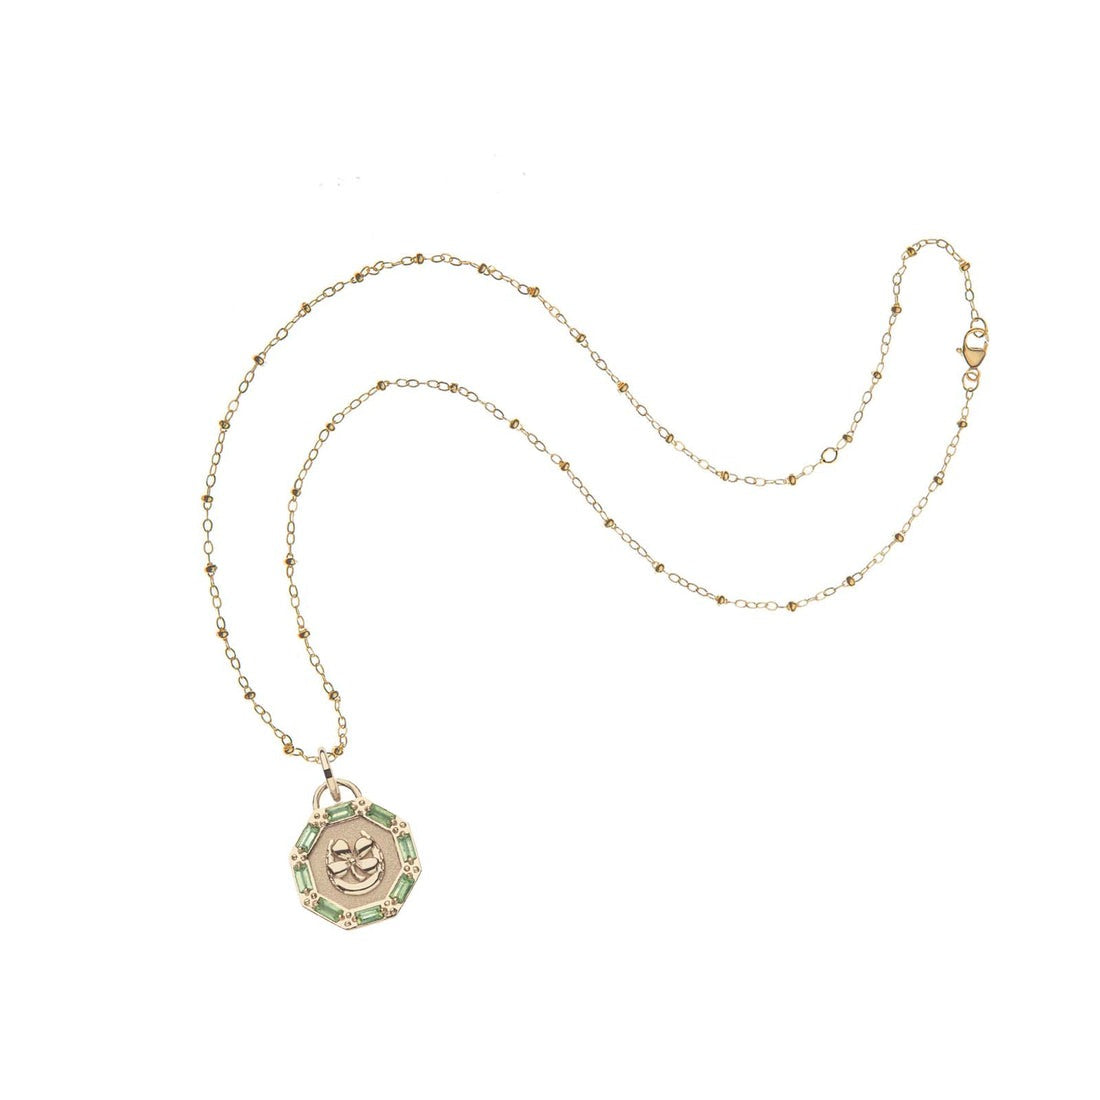 Jane Win LUCKY Petite Embellished Coin Pendant Necklace